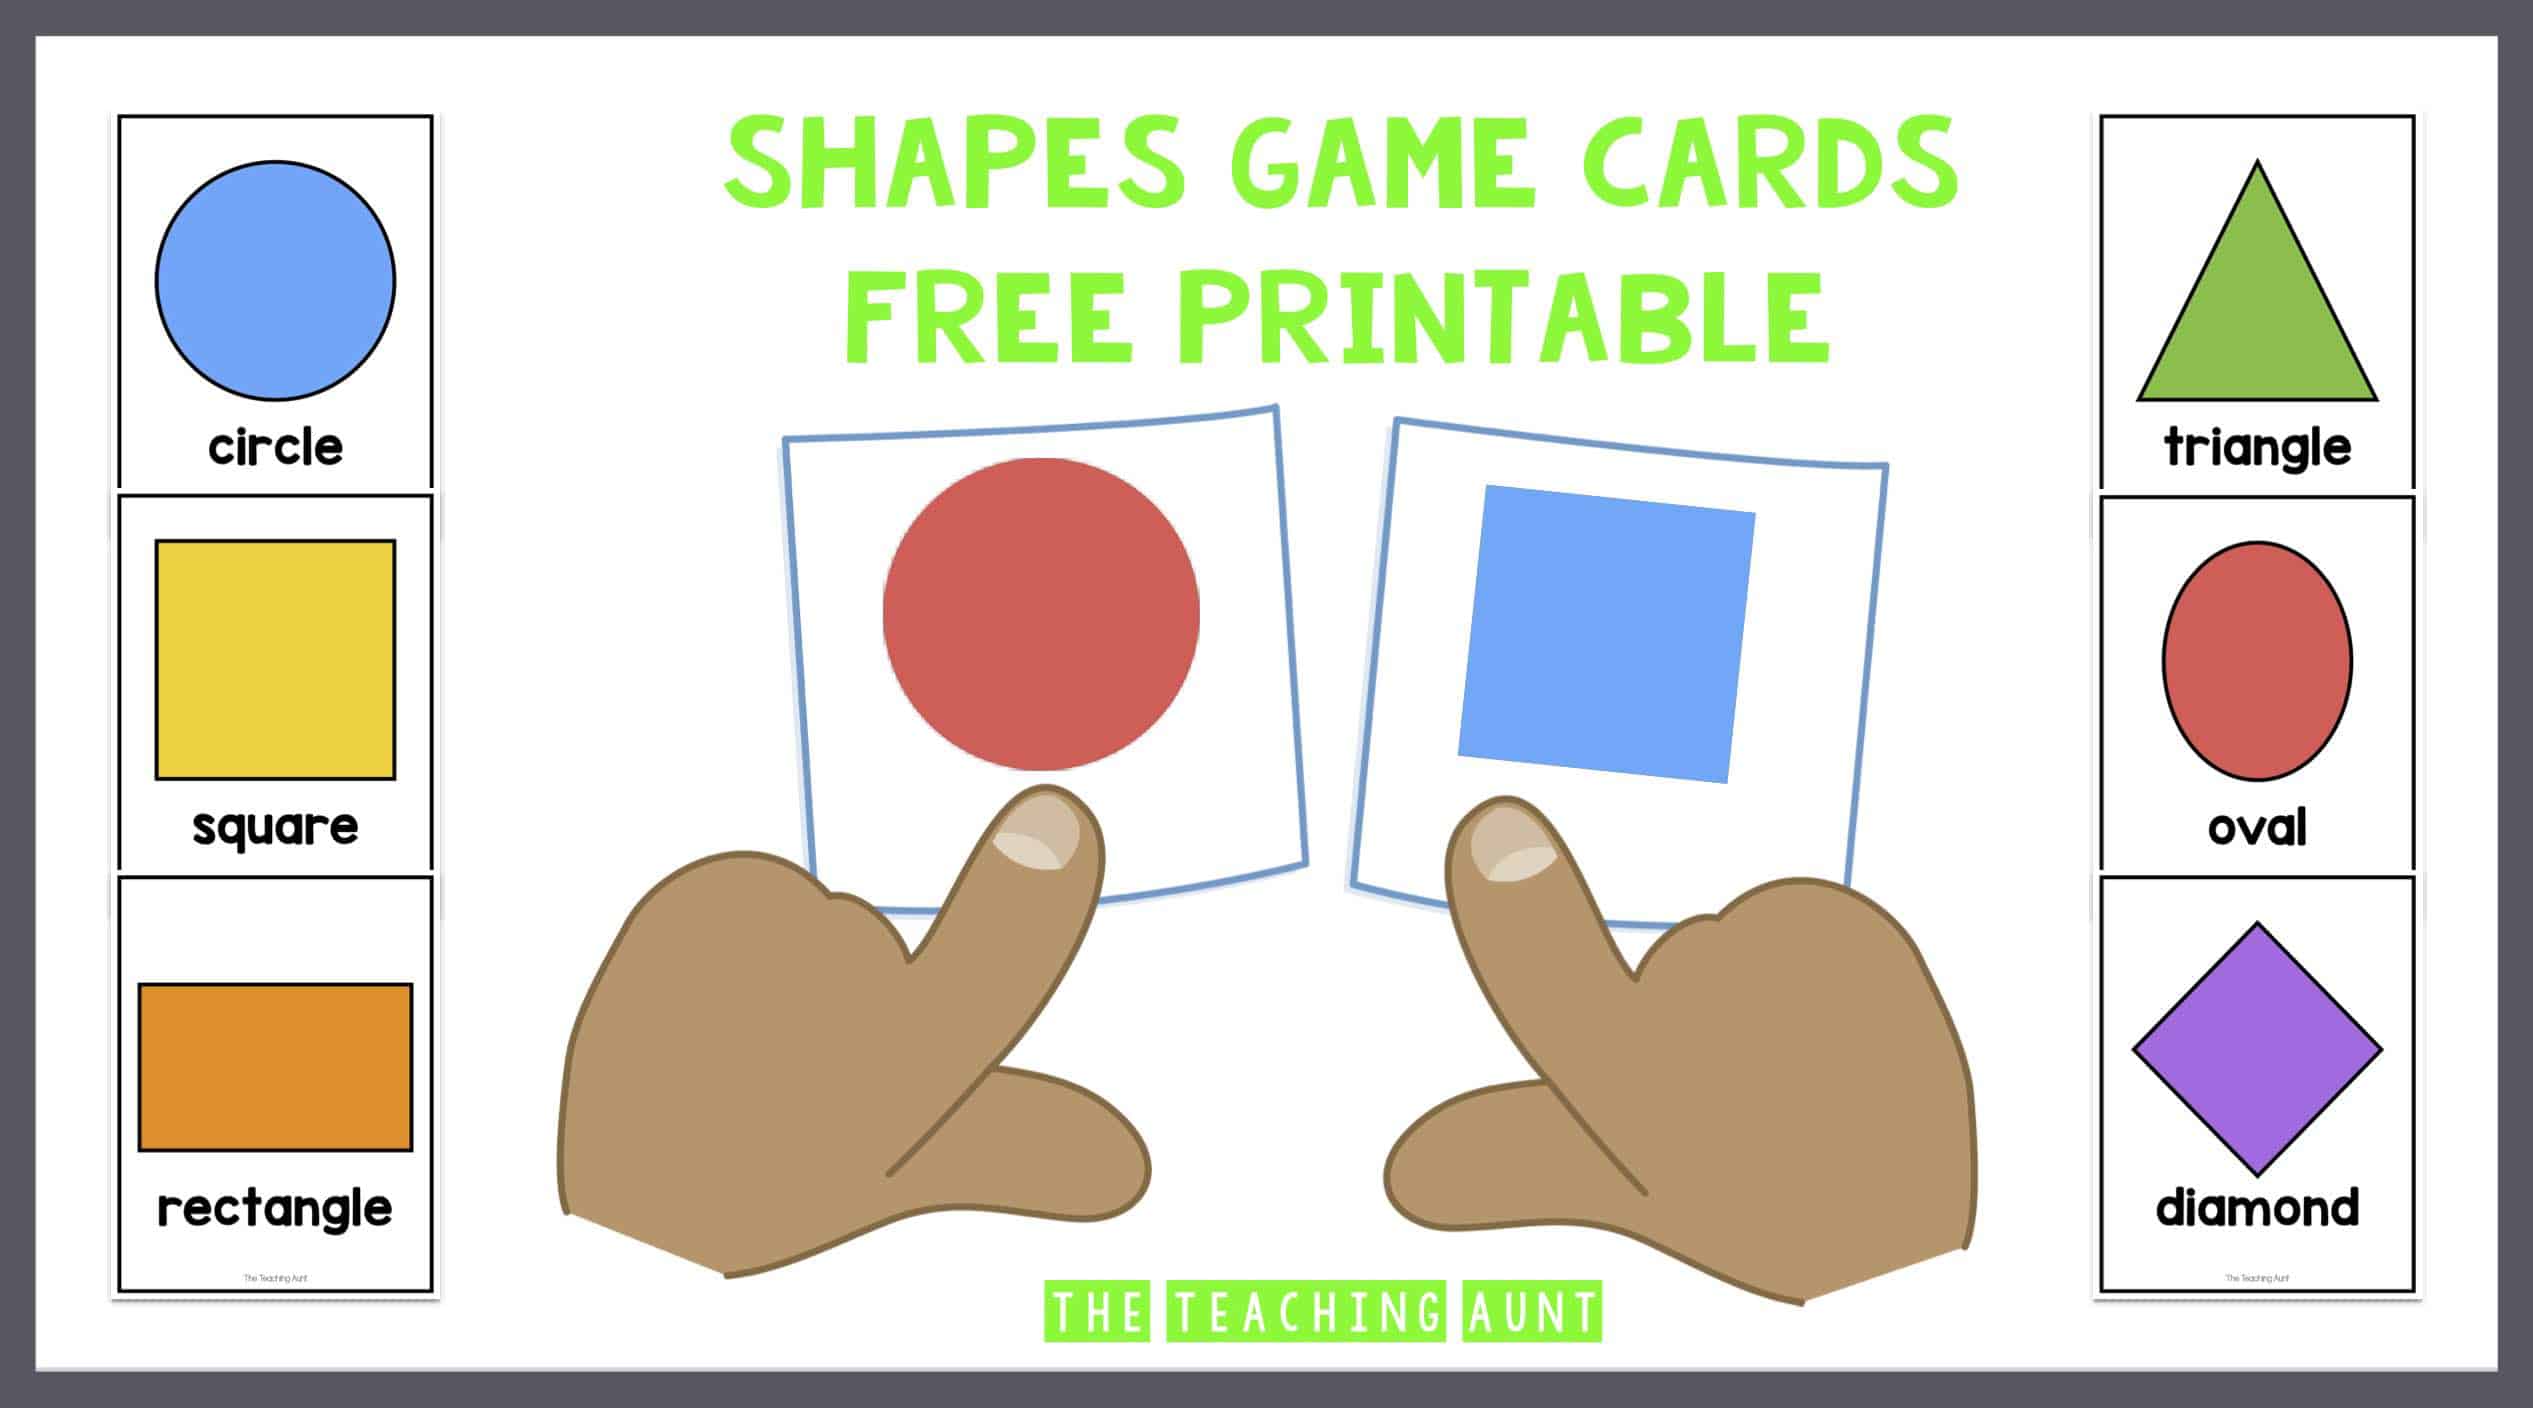 Shapes Game Cards Free Printable